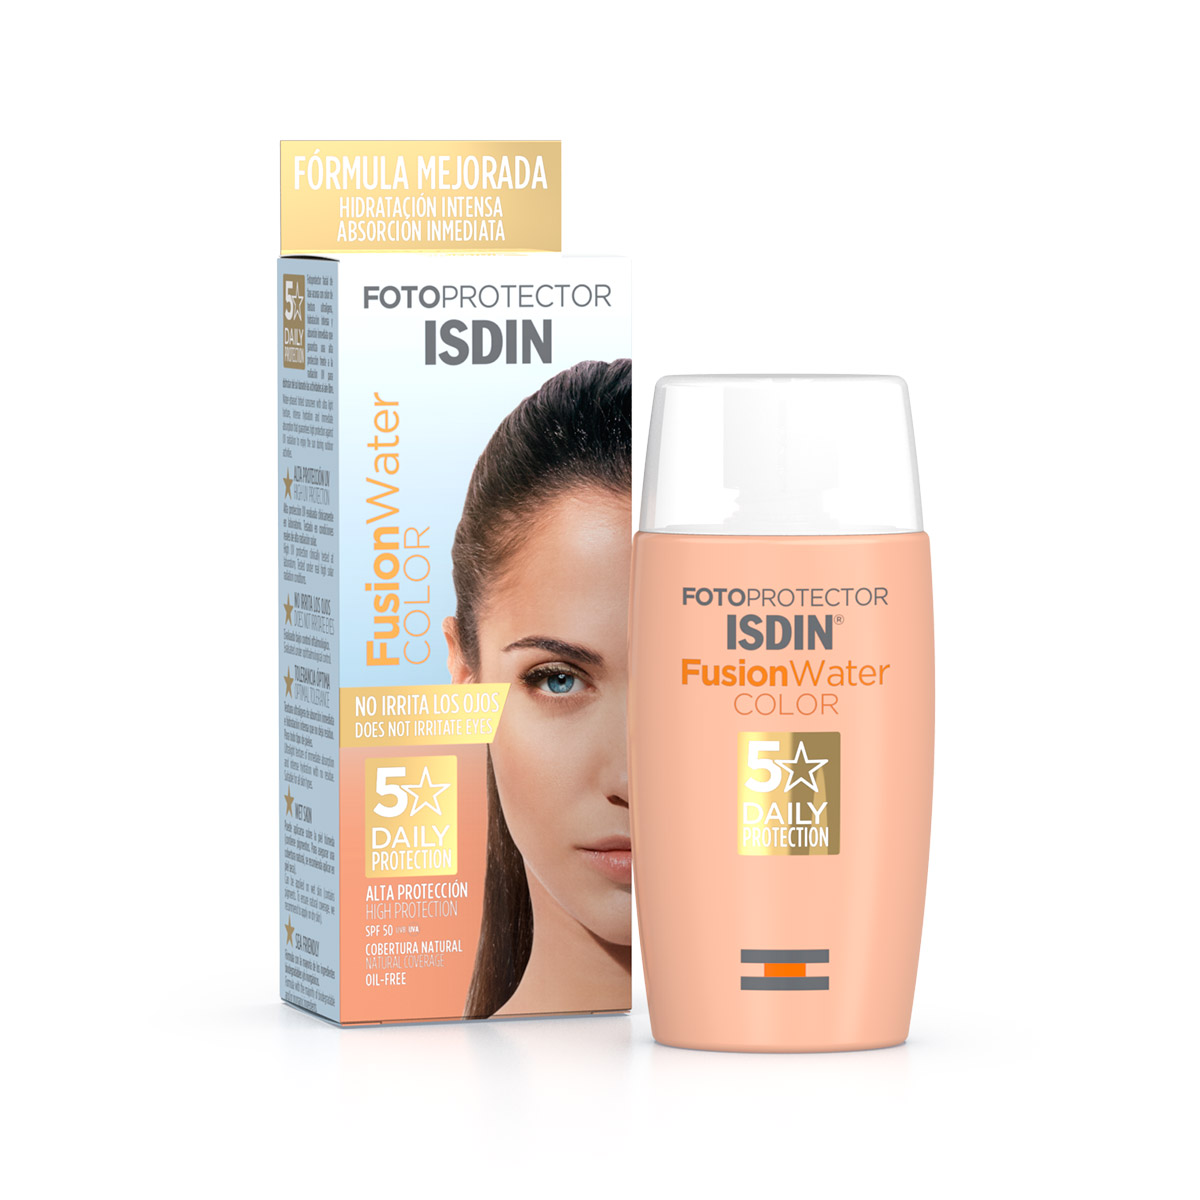 ISDIN FOTOPROTECTOR FUSION WATER COLOR SPF 50 @ 